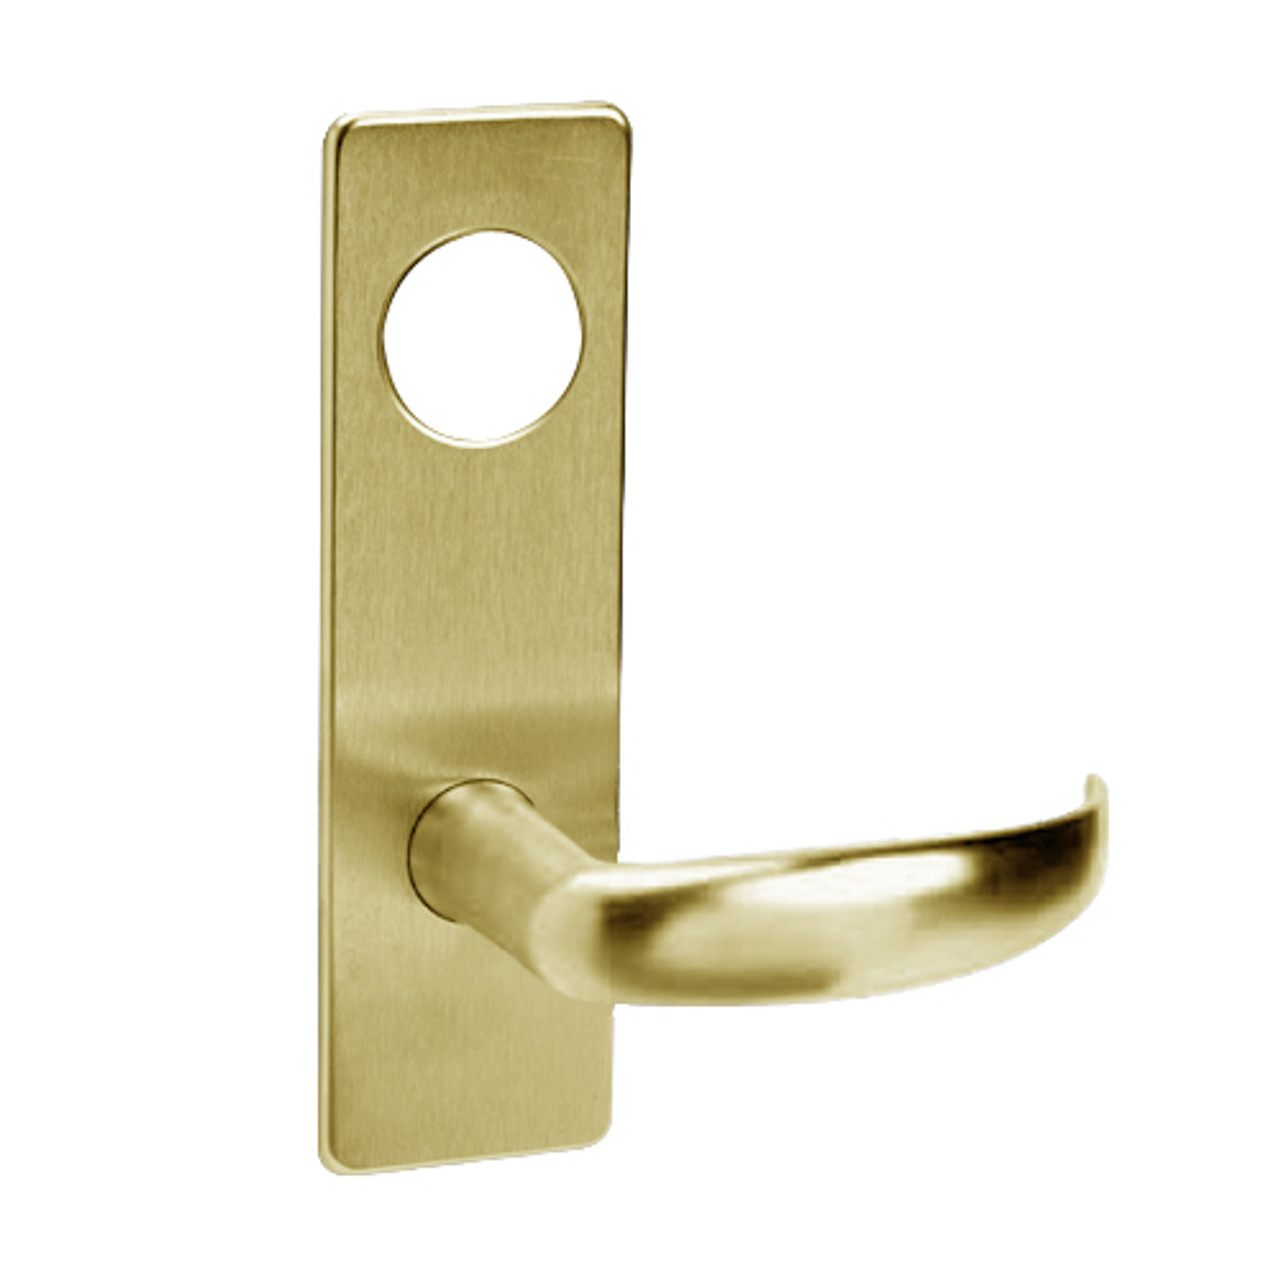 ML2029-PSM-606-M31 Corbin Russwin ML2000 Series Mortise Hotel Trim Pack with Princeton Lever and Deadbolt in Satin Brass